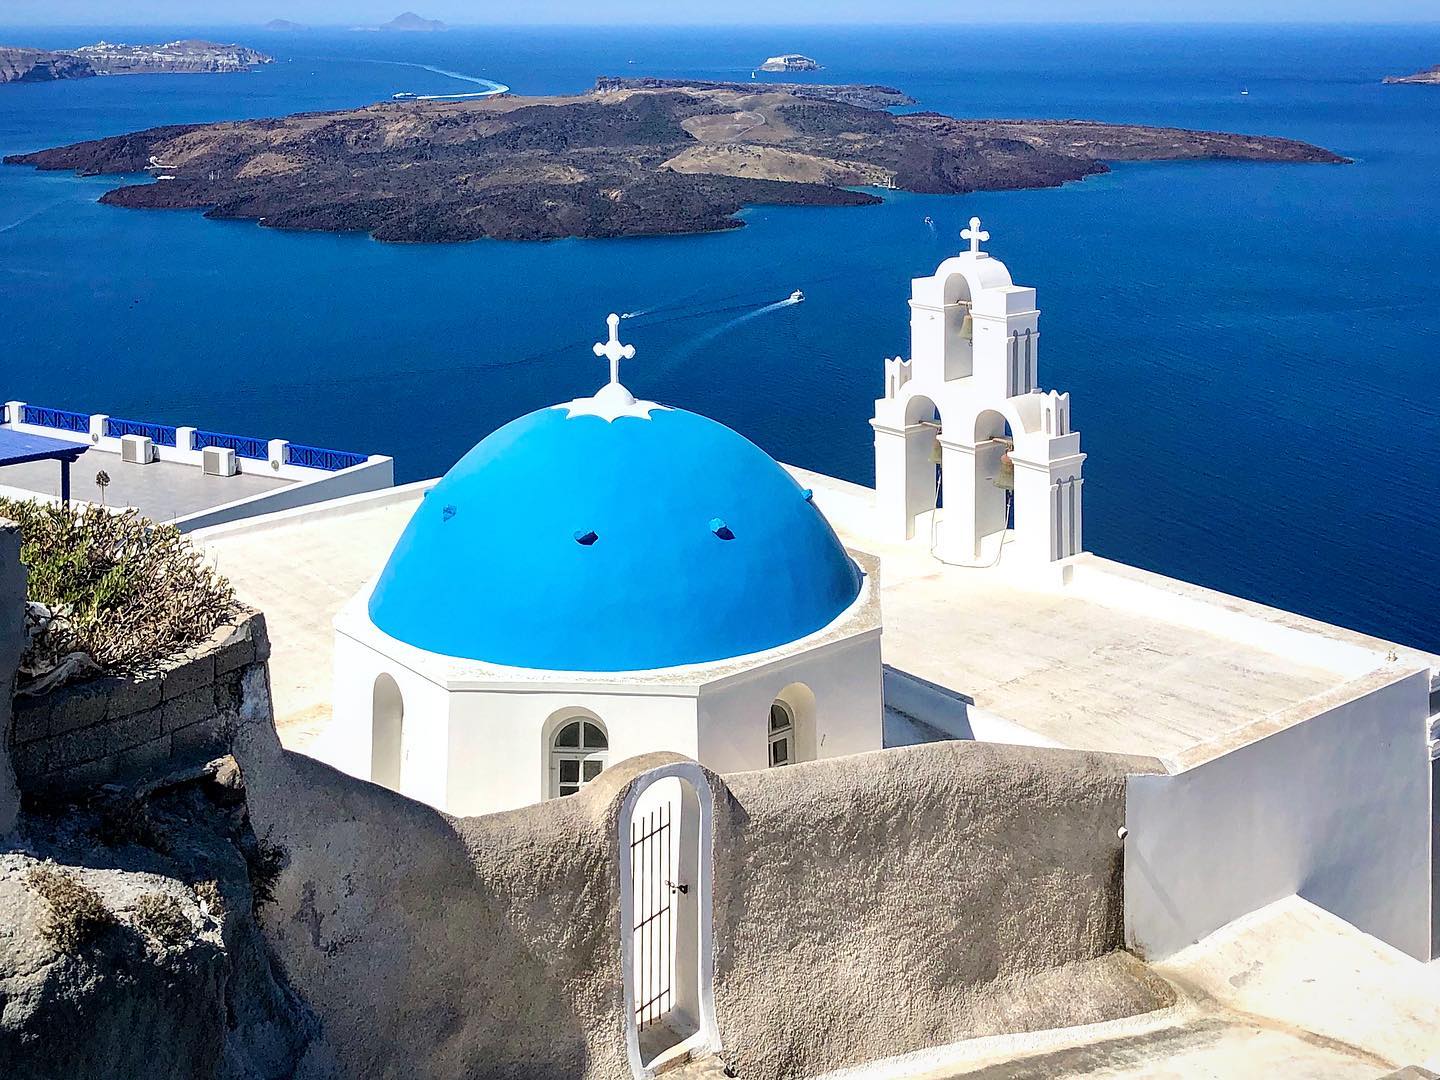 The Three Bells of Fira is a Greek Catholic church on the island of Santorini. The church is famed for its three bells, blue dome, and picturesque views 🇬🇷
.
.
.
#santorini #greece #fira #threebells #threebellsoffira #thira #santorin #griechenland #santorinigreece #santoriniisland #greece_travel #greeceislands #greecestagram #sea #view #viewpoint #instagood #travel #santoriniview #santorinigram #santorinitravel #greece_moments #greece_vacations #greeceholiday #santorinistyle #greekislands #greekstyle #thirasantorini #fira #firasantorini #volcano